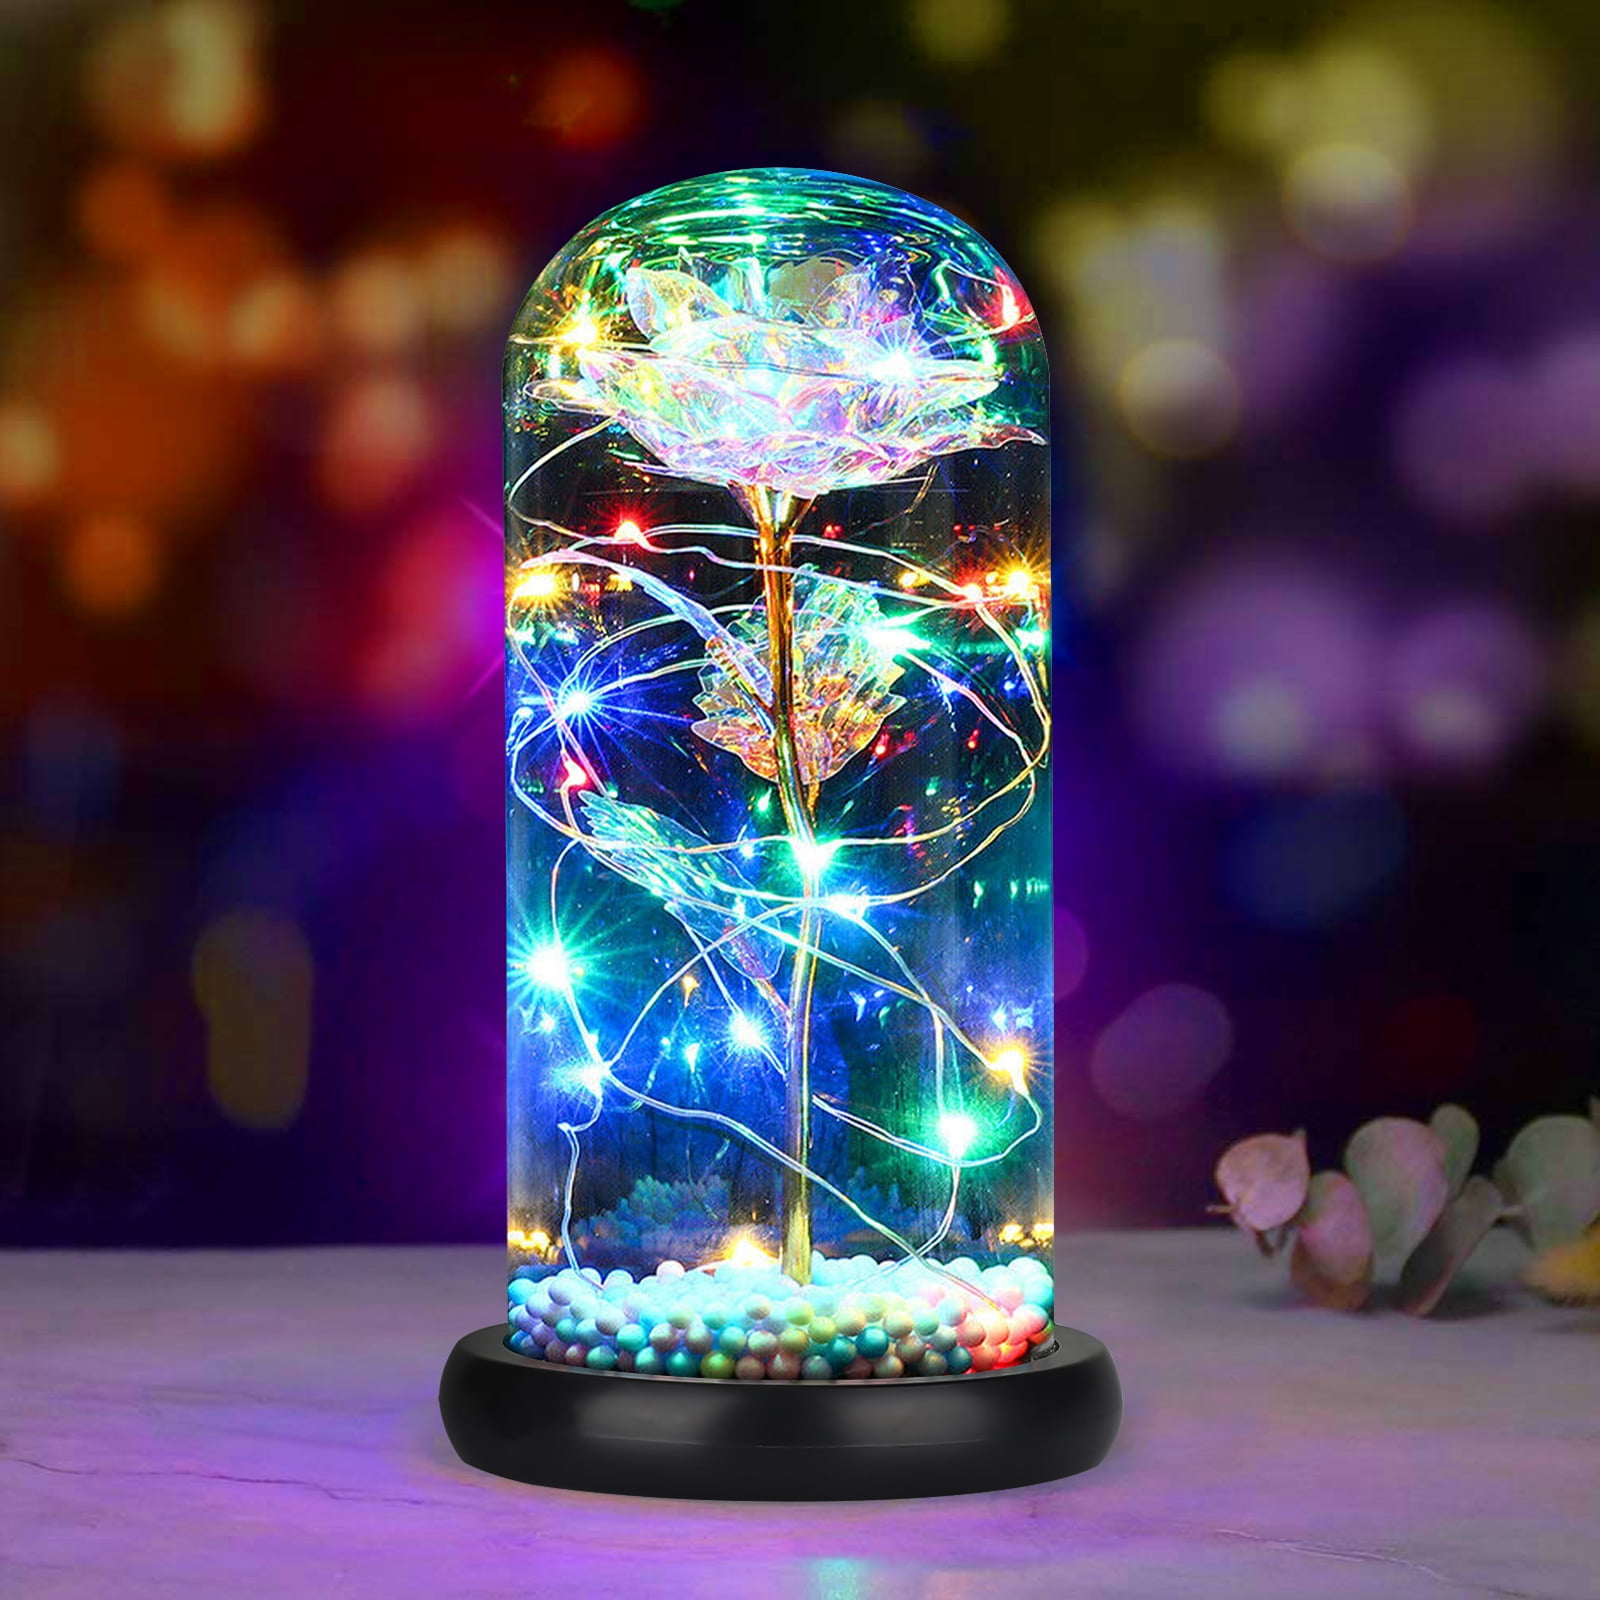 Unique Gift for Her,Graduate,Graduation Gift,Christmas Last Forever in Glass Dome Gift for her,Women's Gift Birthday Gifts Colorful Artificial Flower Rose Gift Led Light String on Colorful Flower